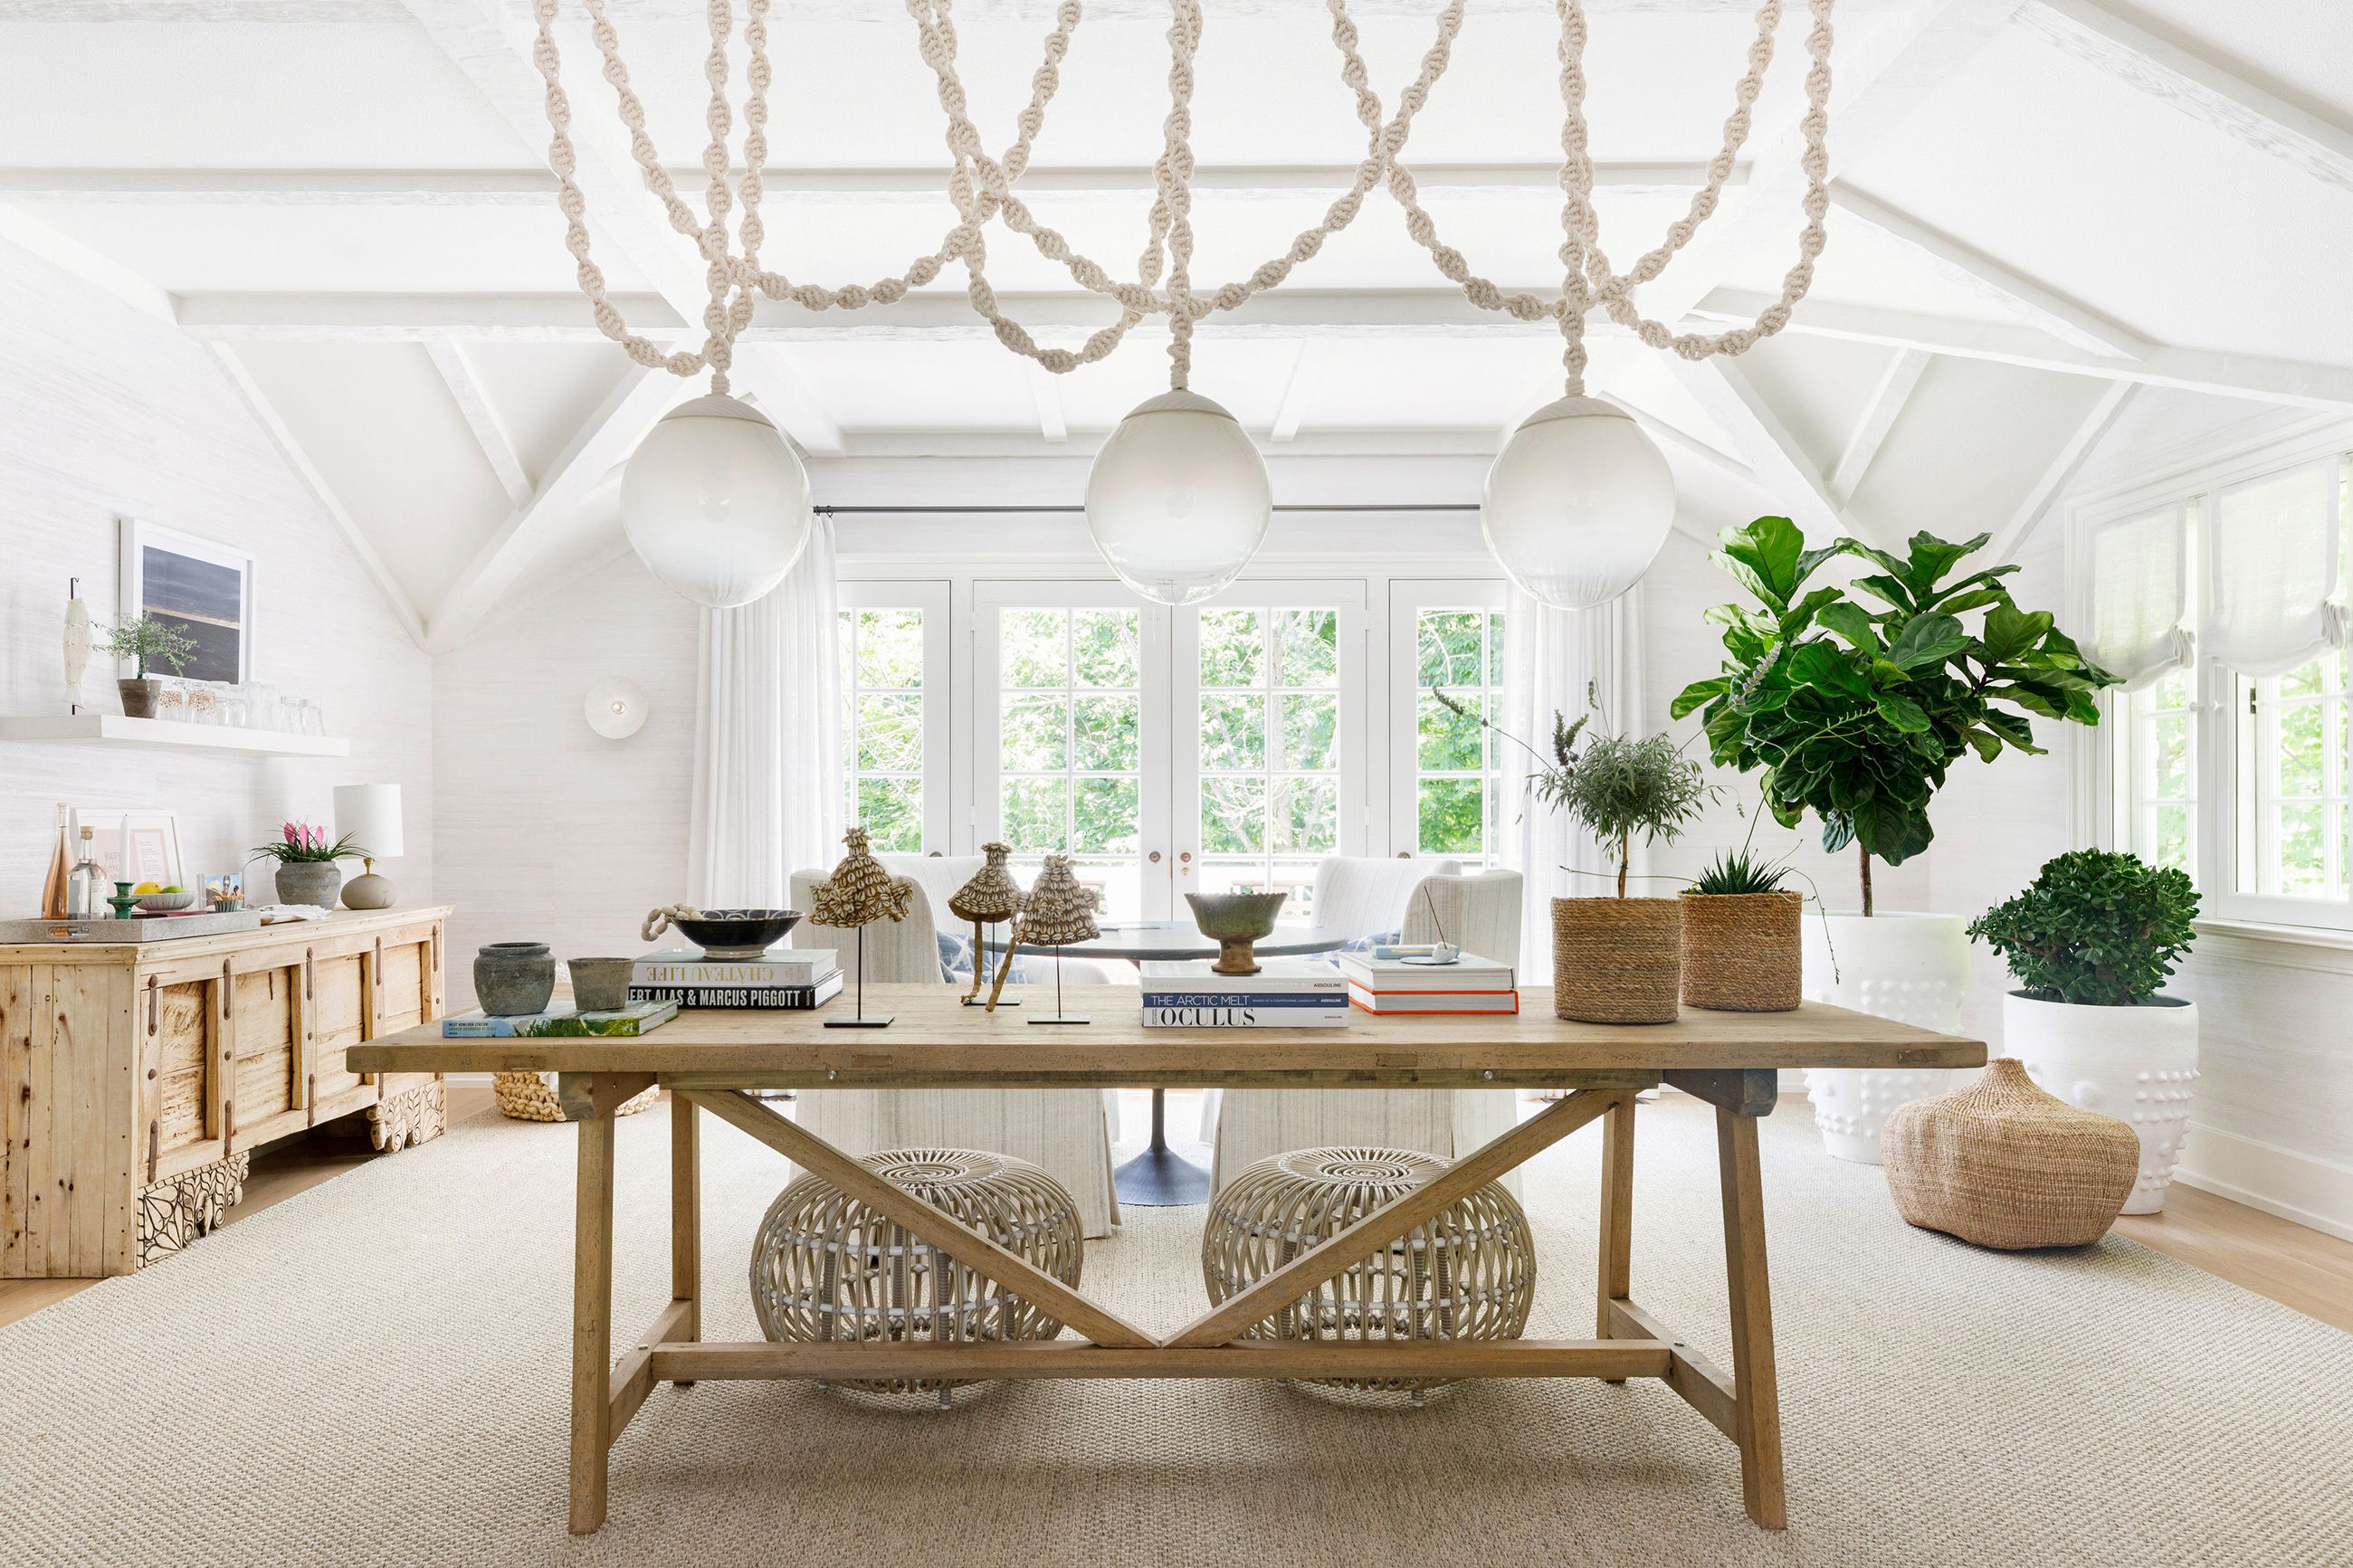 The most popular home interior design style in 2021